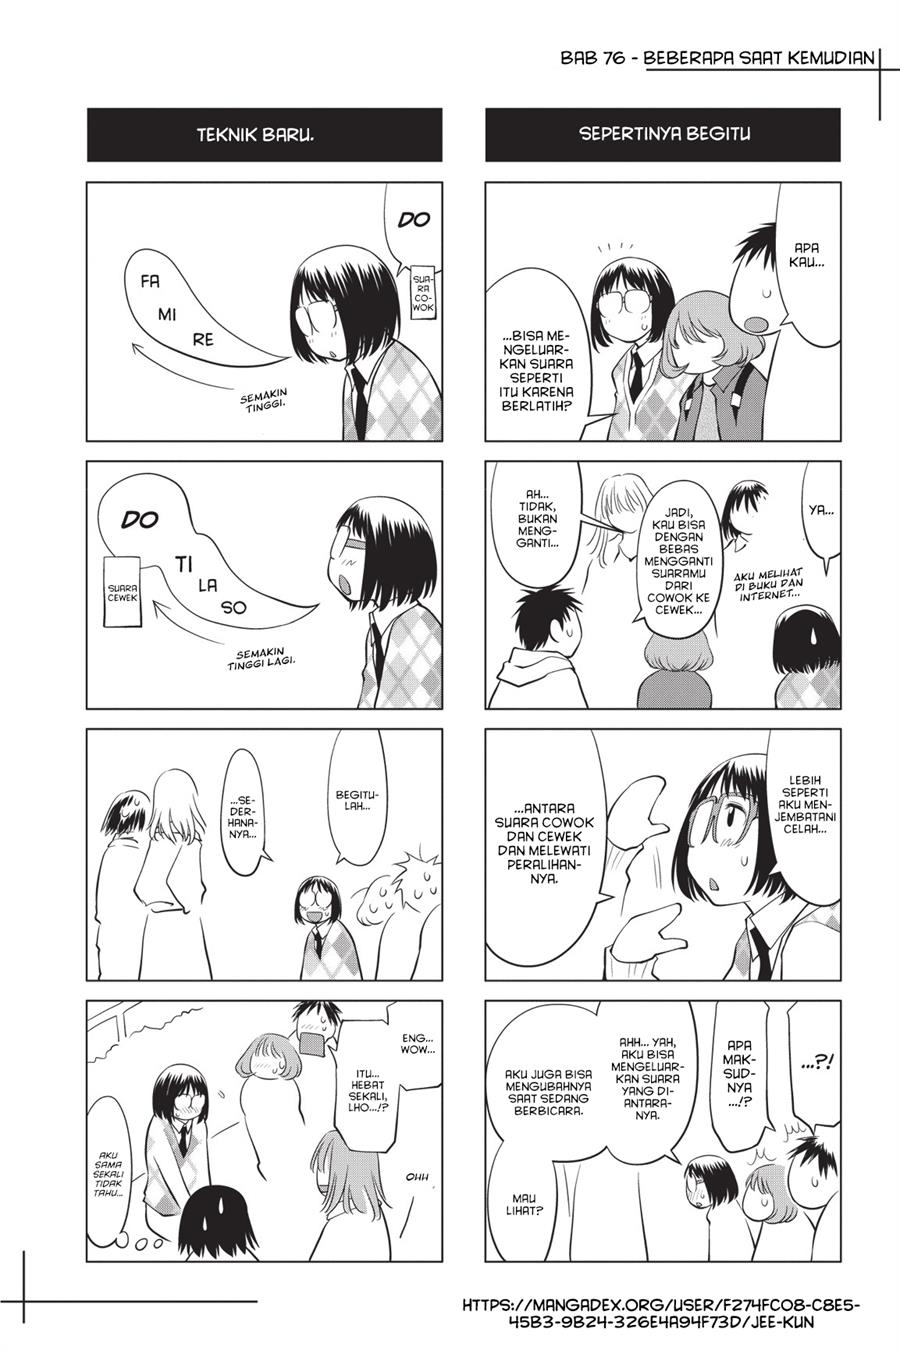 Genshiken – The Society for the Study of Modern Visual Culture Chapter 76 Image 29